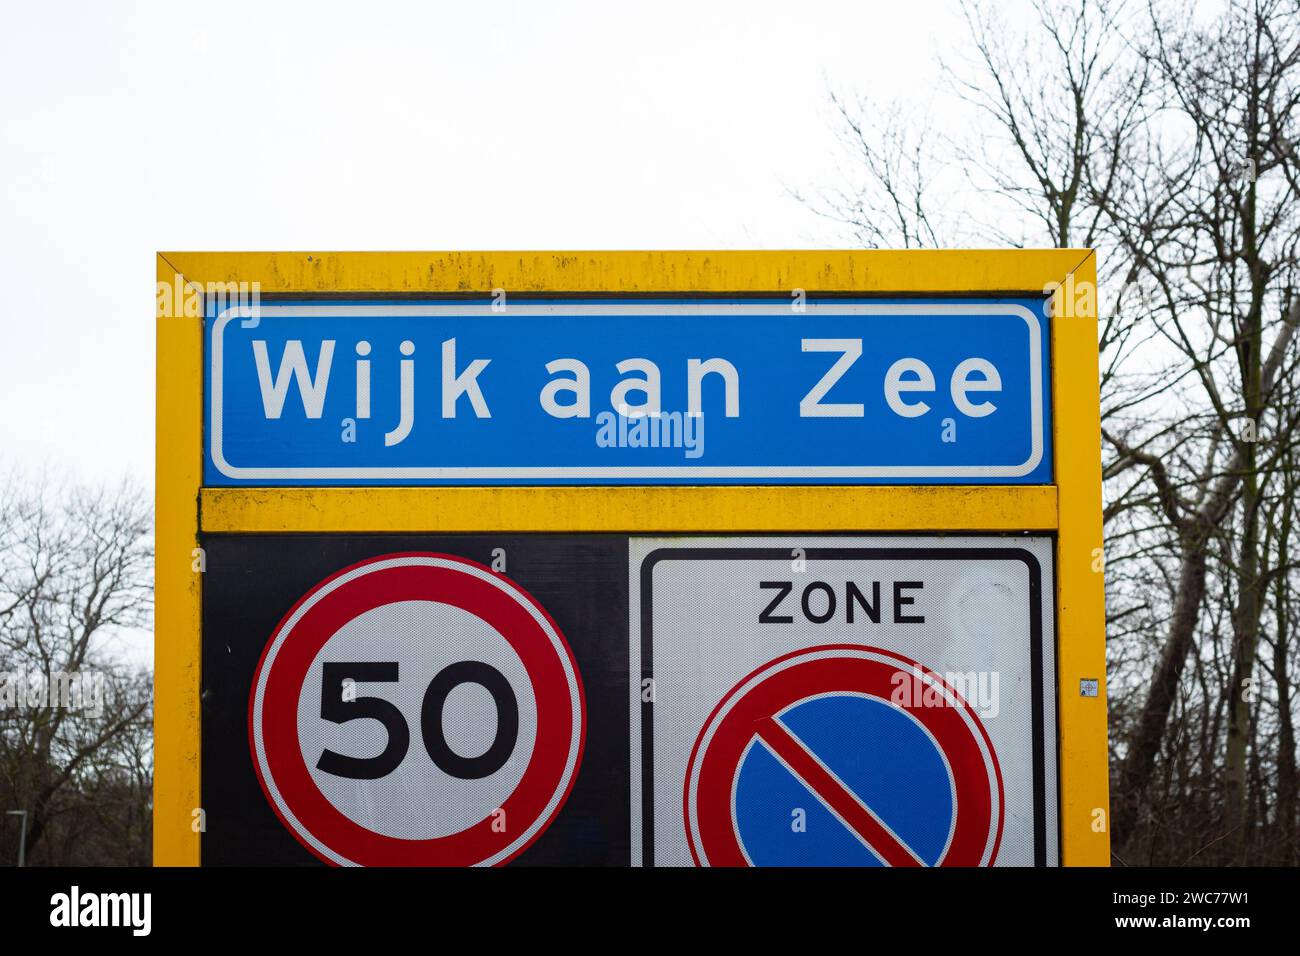 Place name sign of the coastal village of Wijk aan Zee, The Netherlands. Below are signs of a speed limit of 50 and a no parking sign. Stock Photo